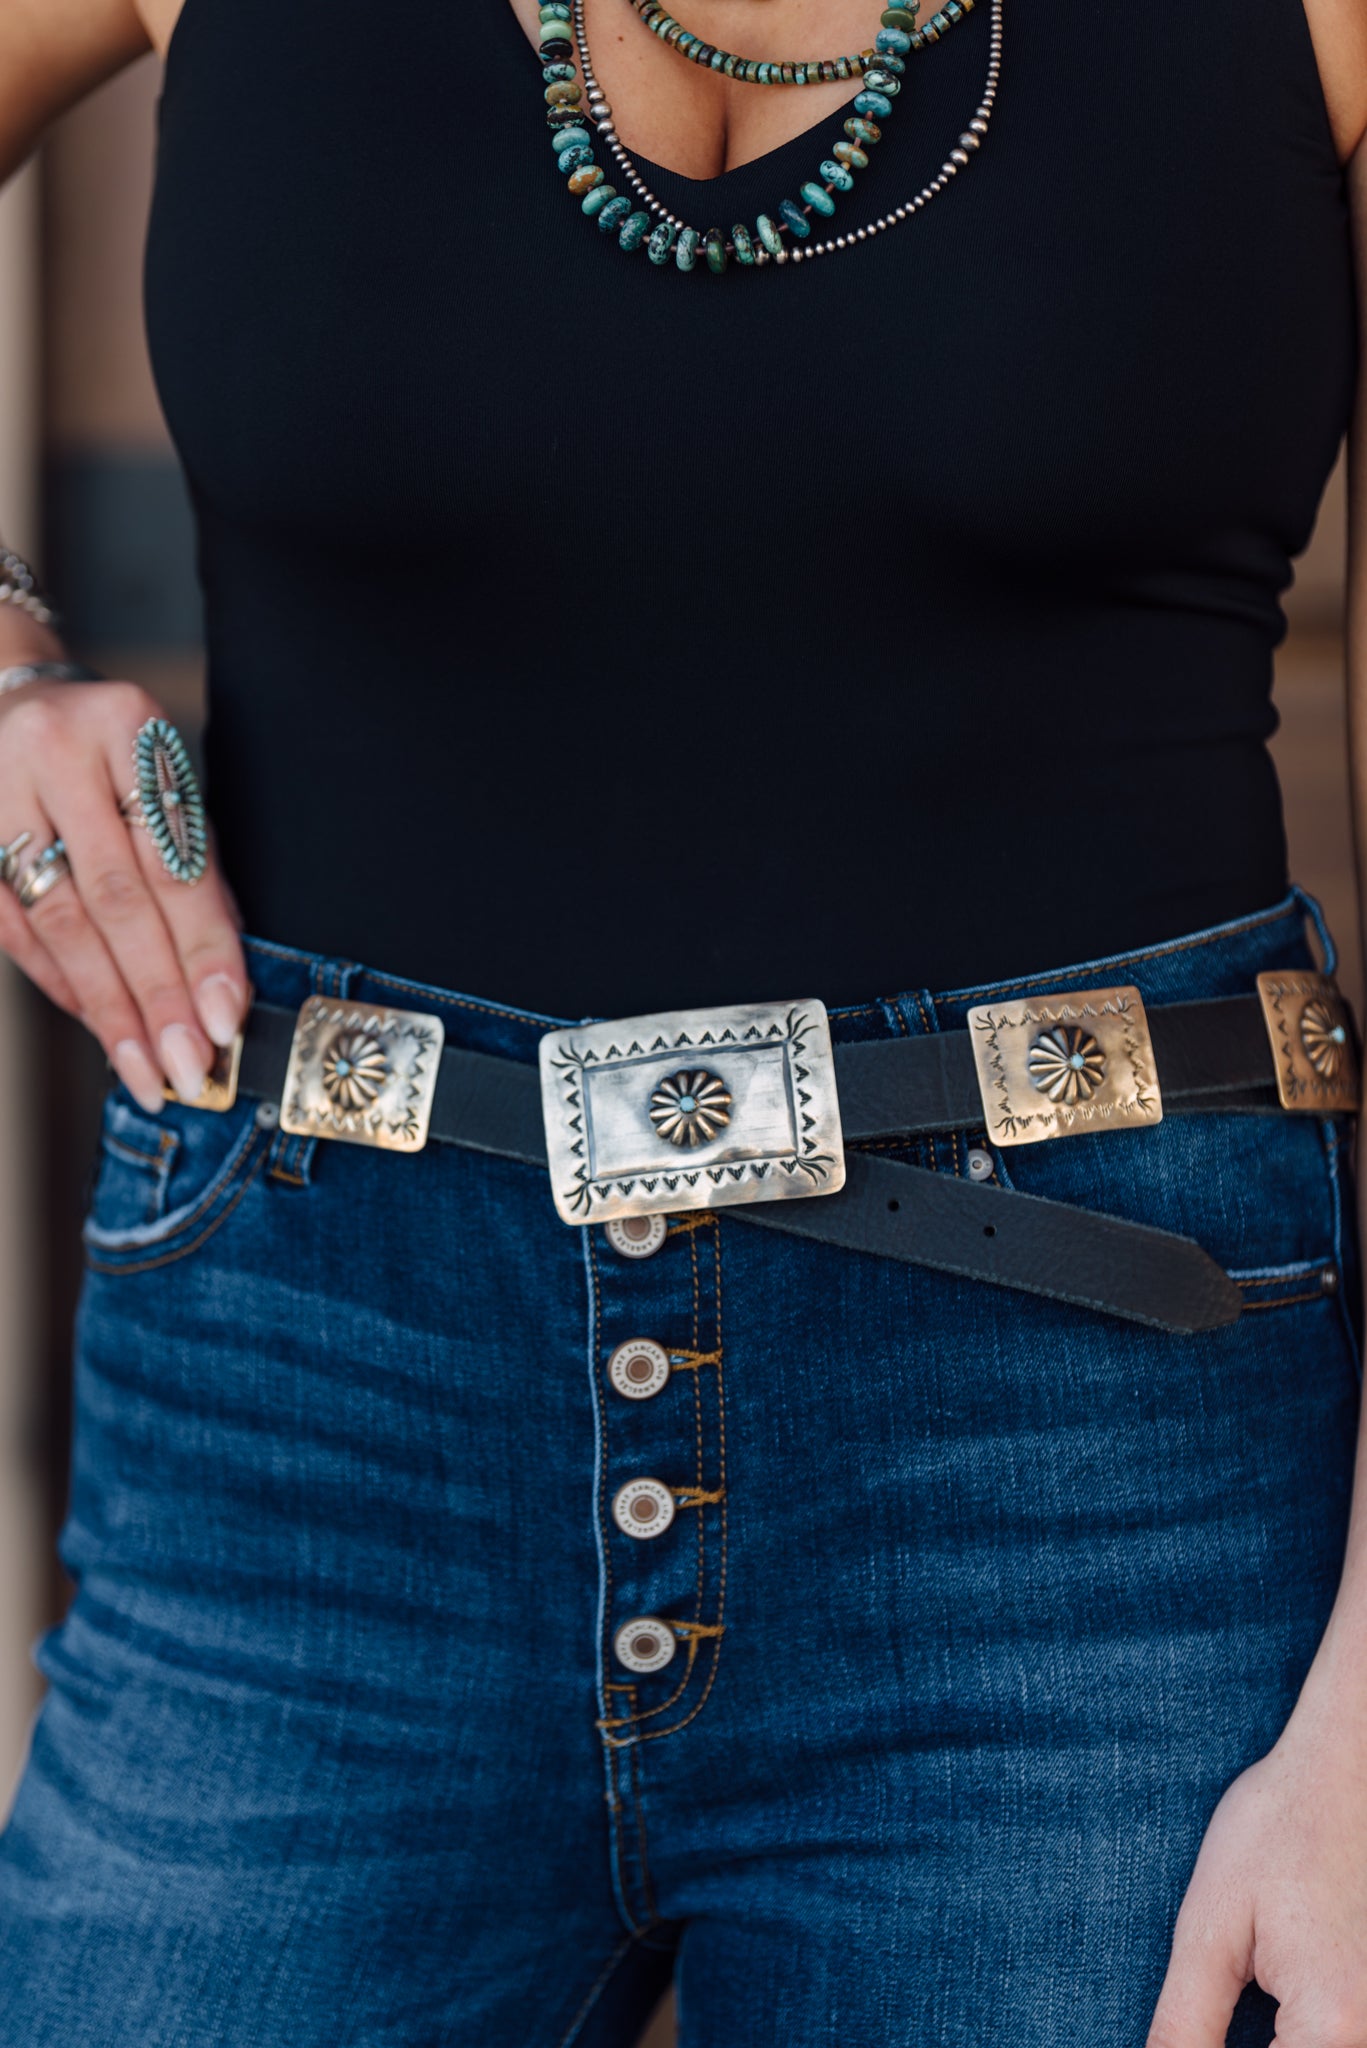 The Stephenville Concho Belt